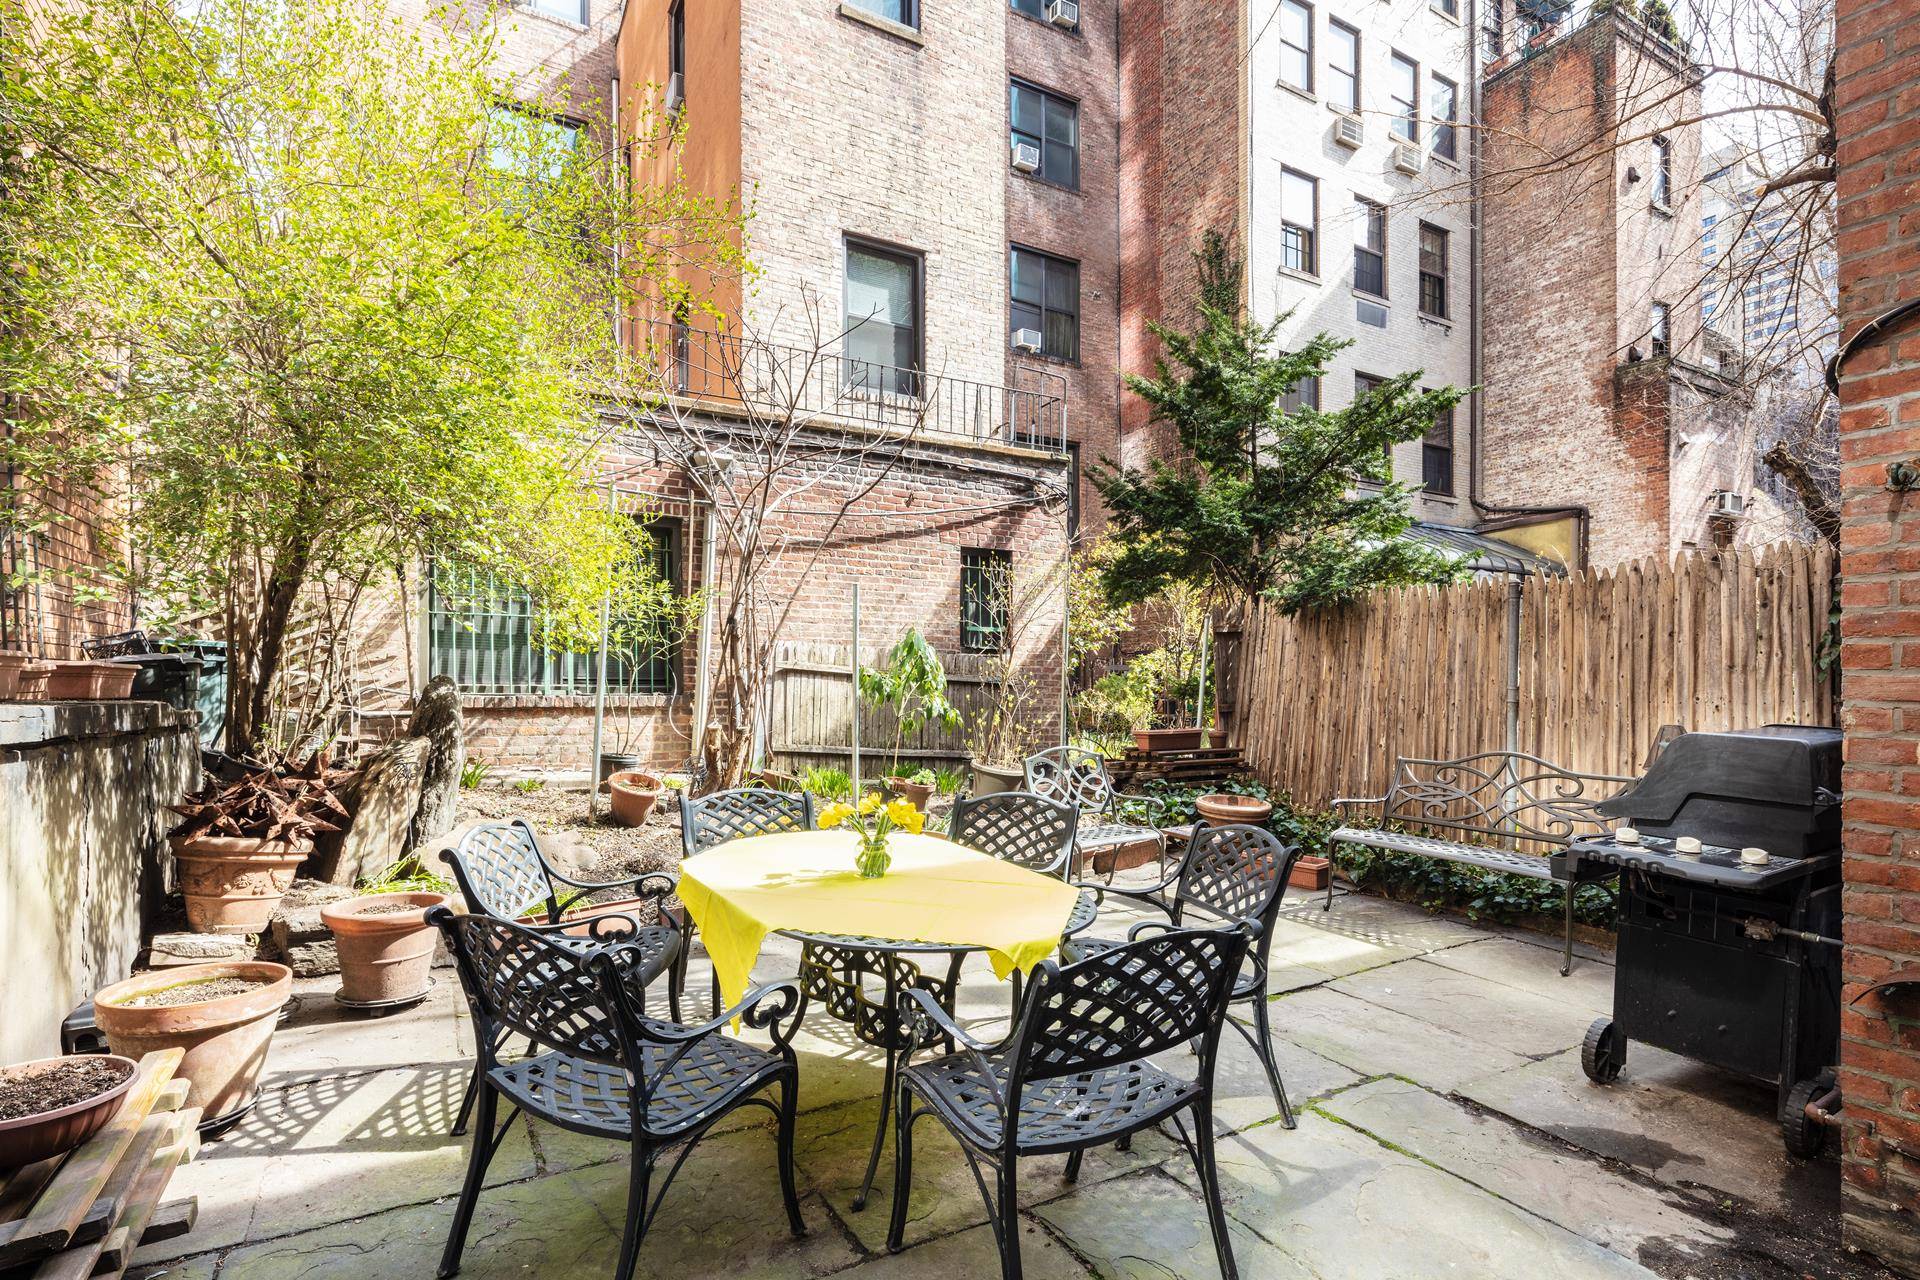 Stately brownstone apartment professional space in prime Murray Hill location.